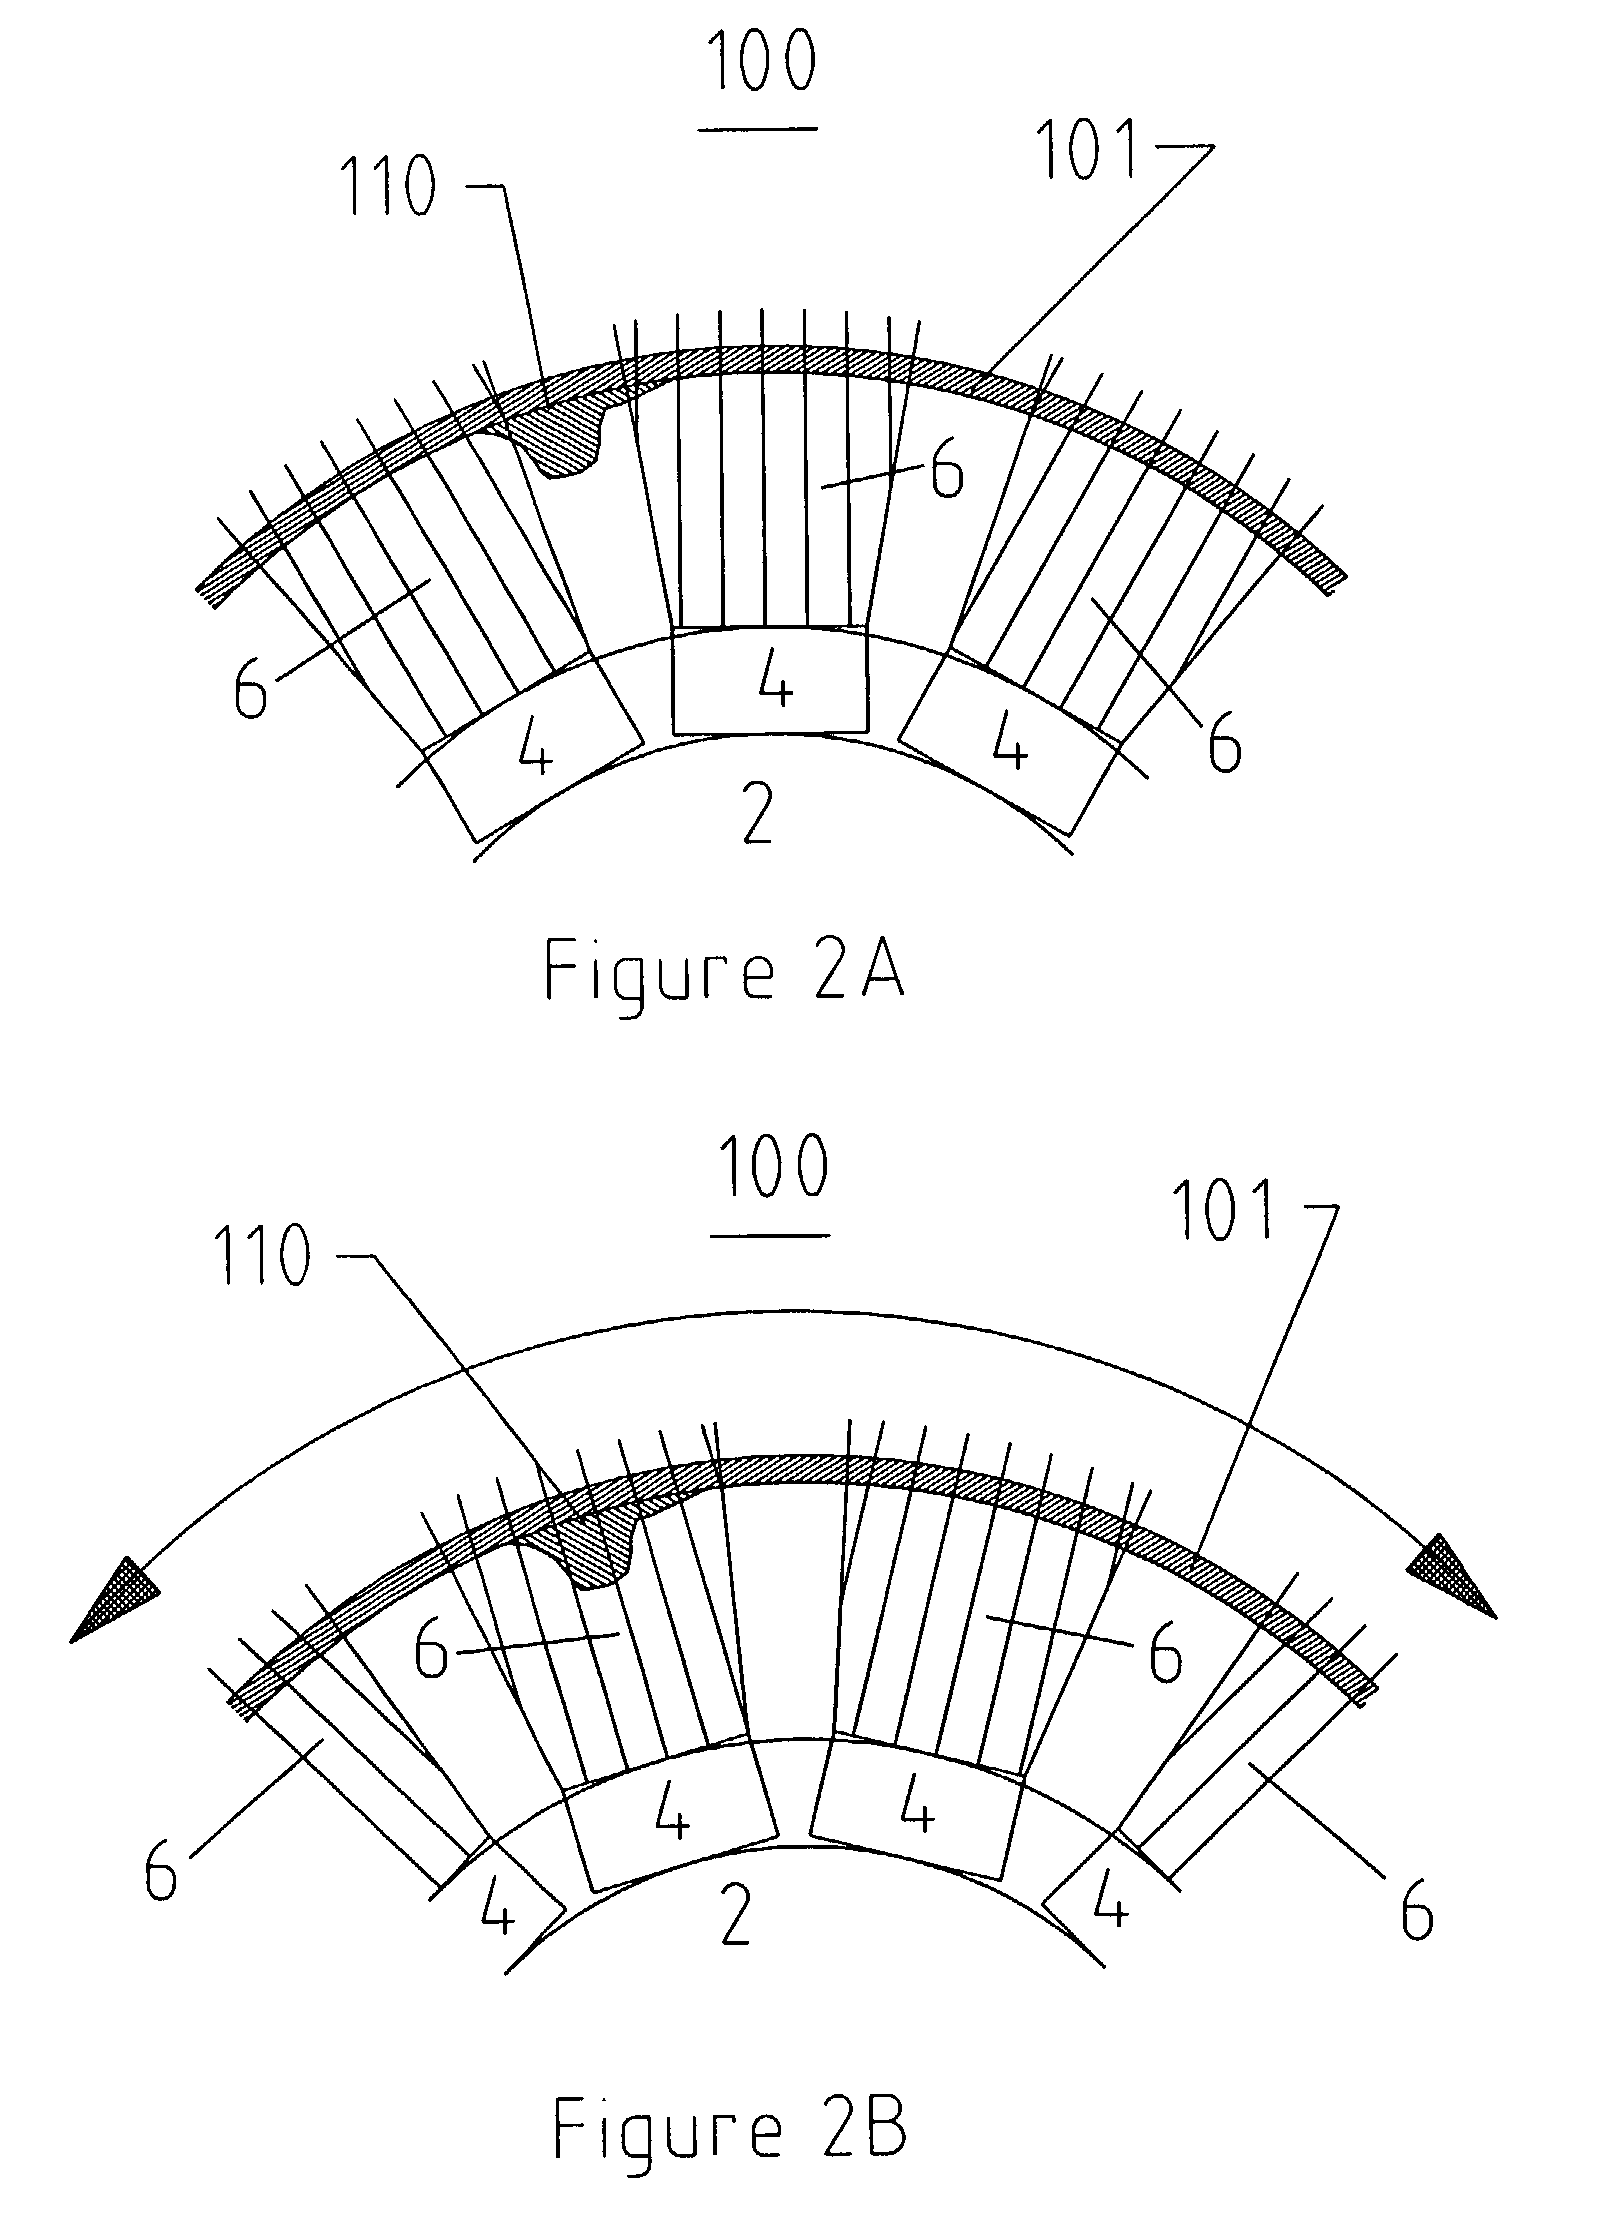 Resolution optical and ultrasound devices for imaging and treatment of body lumens